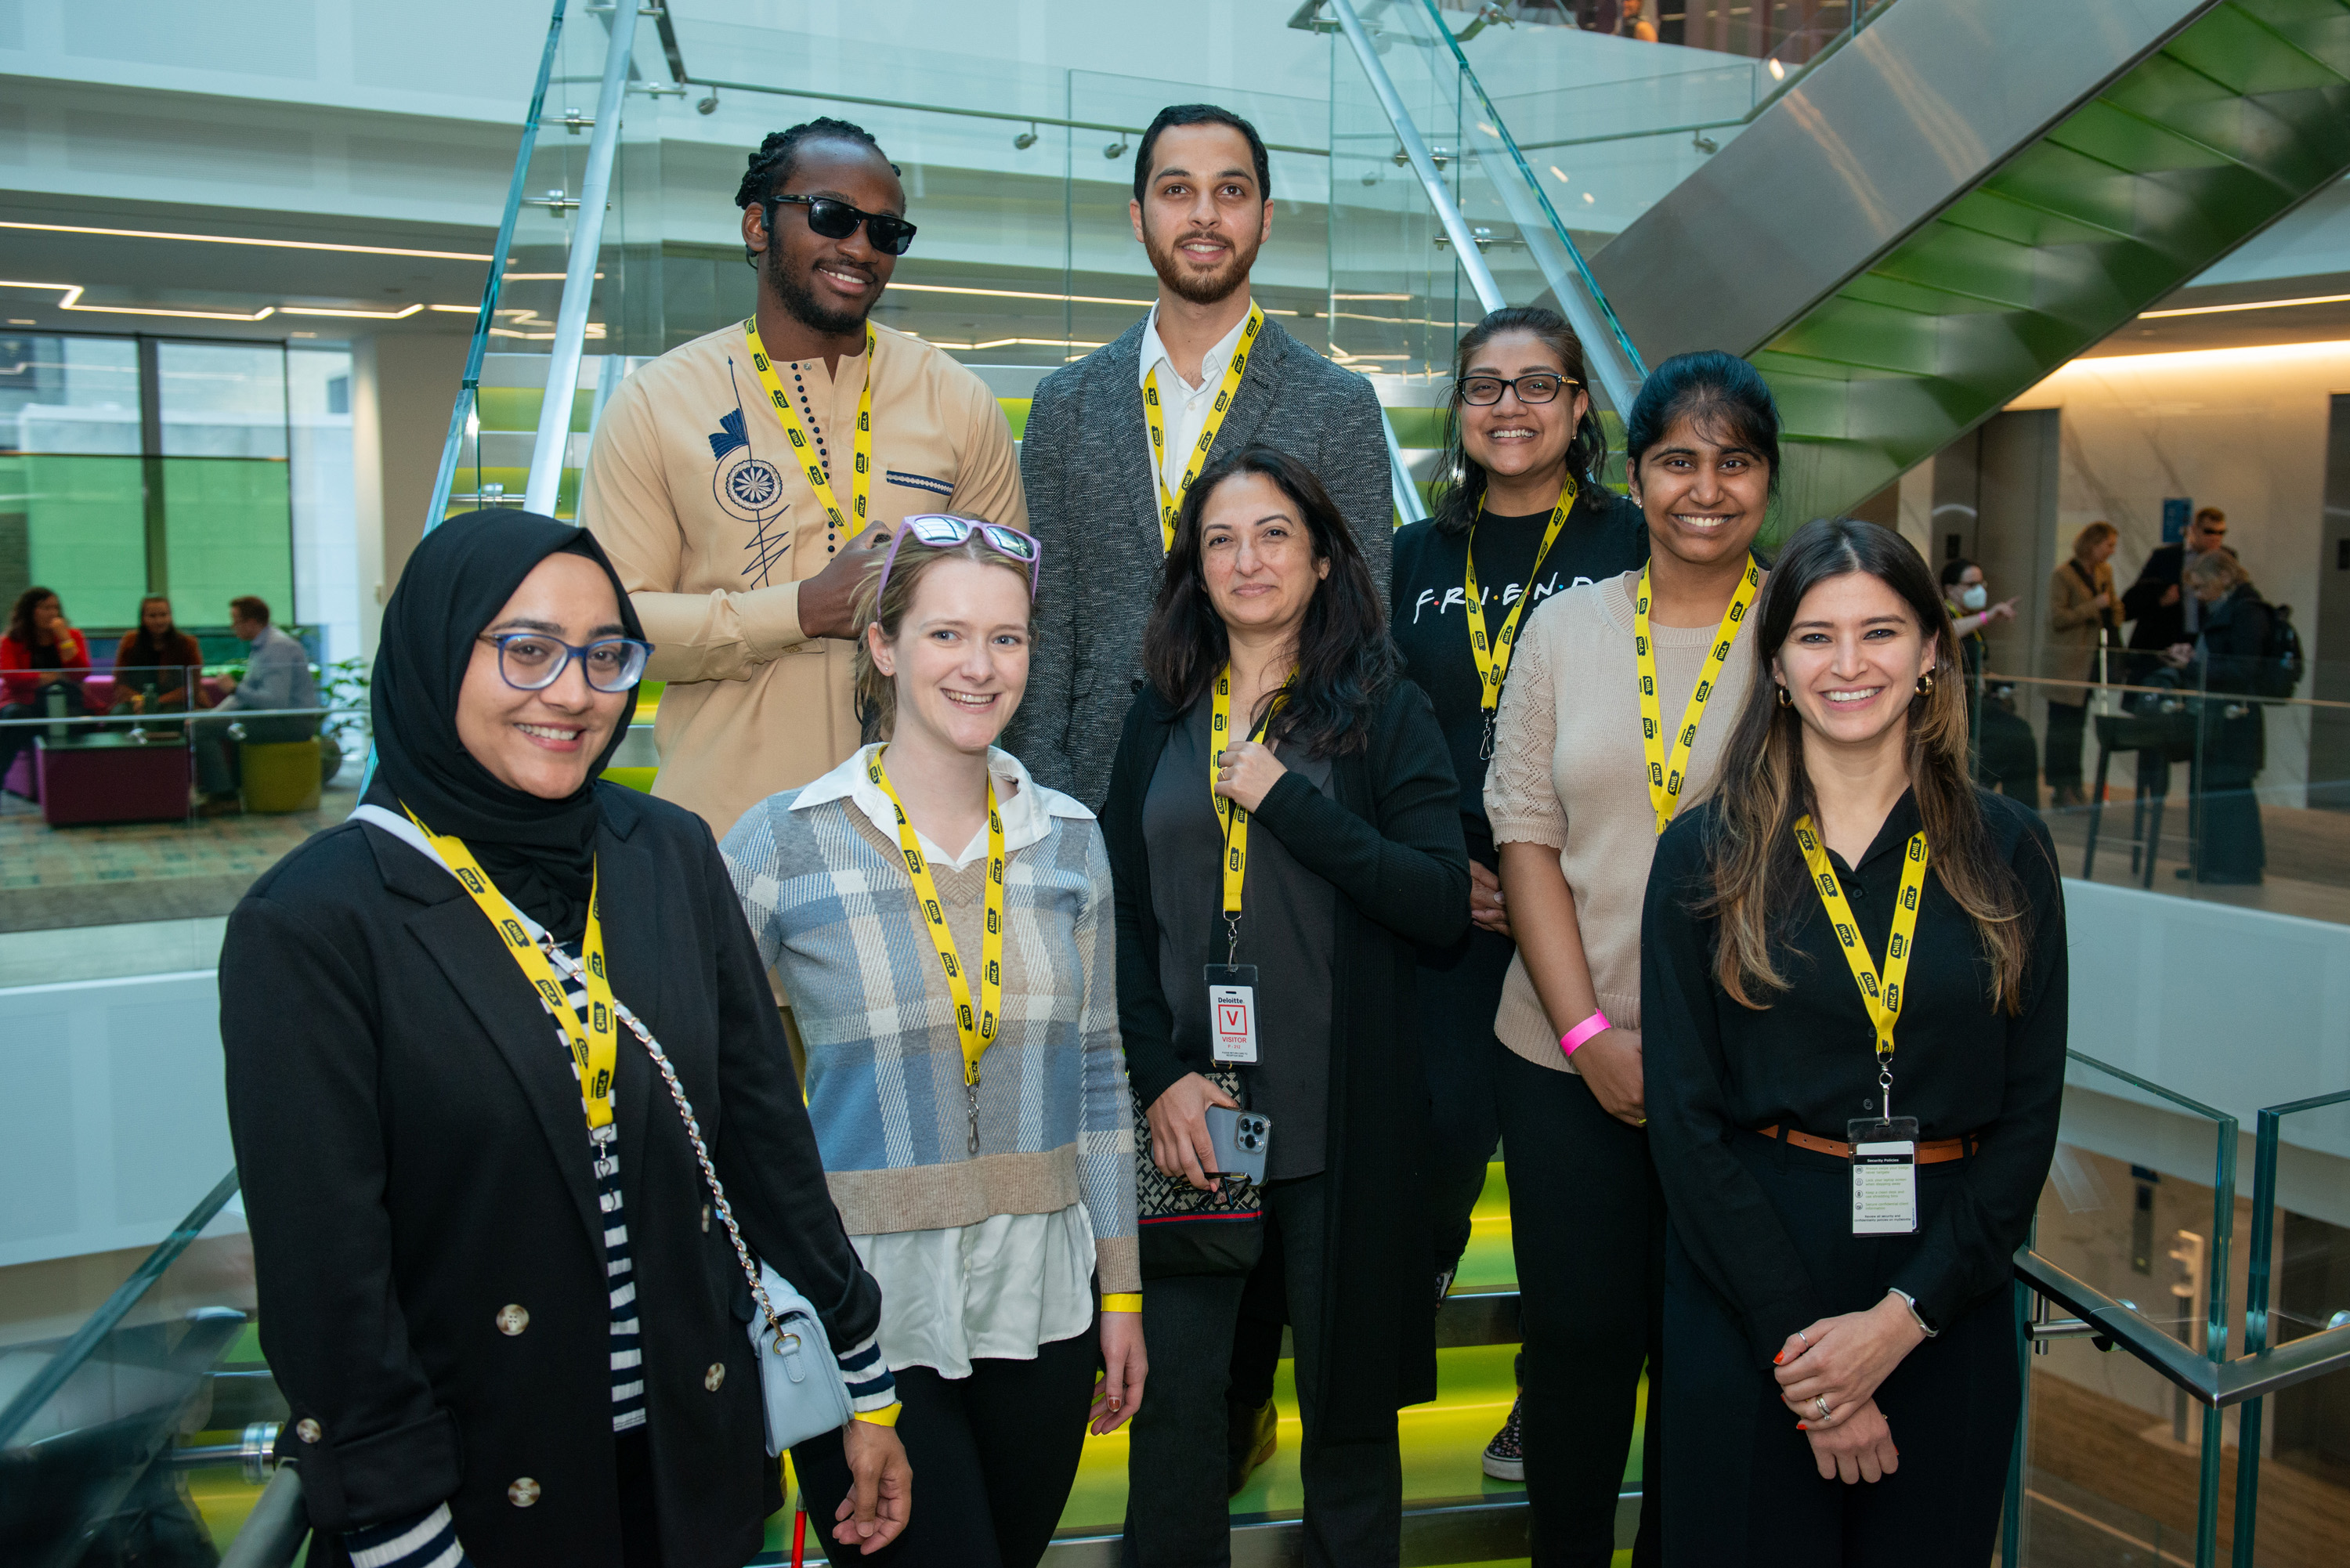 A group of CNIB volunteers wearing yellow CNIB branded lanyards stand together, posing for a photo. 